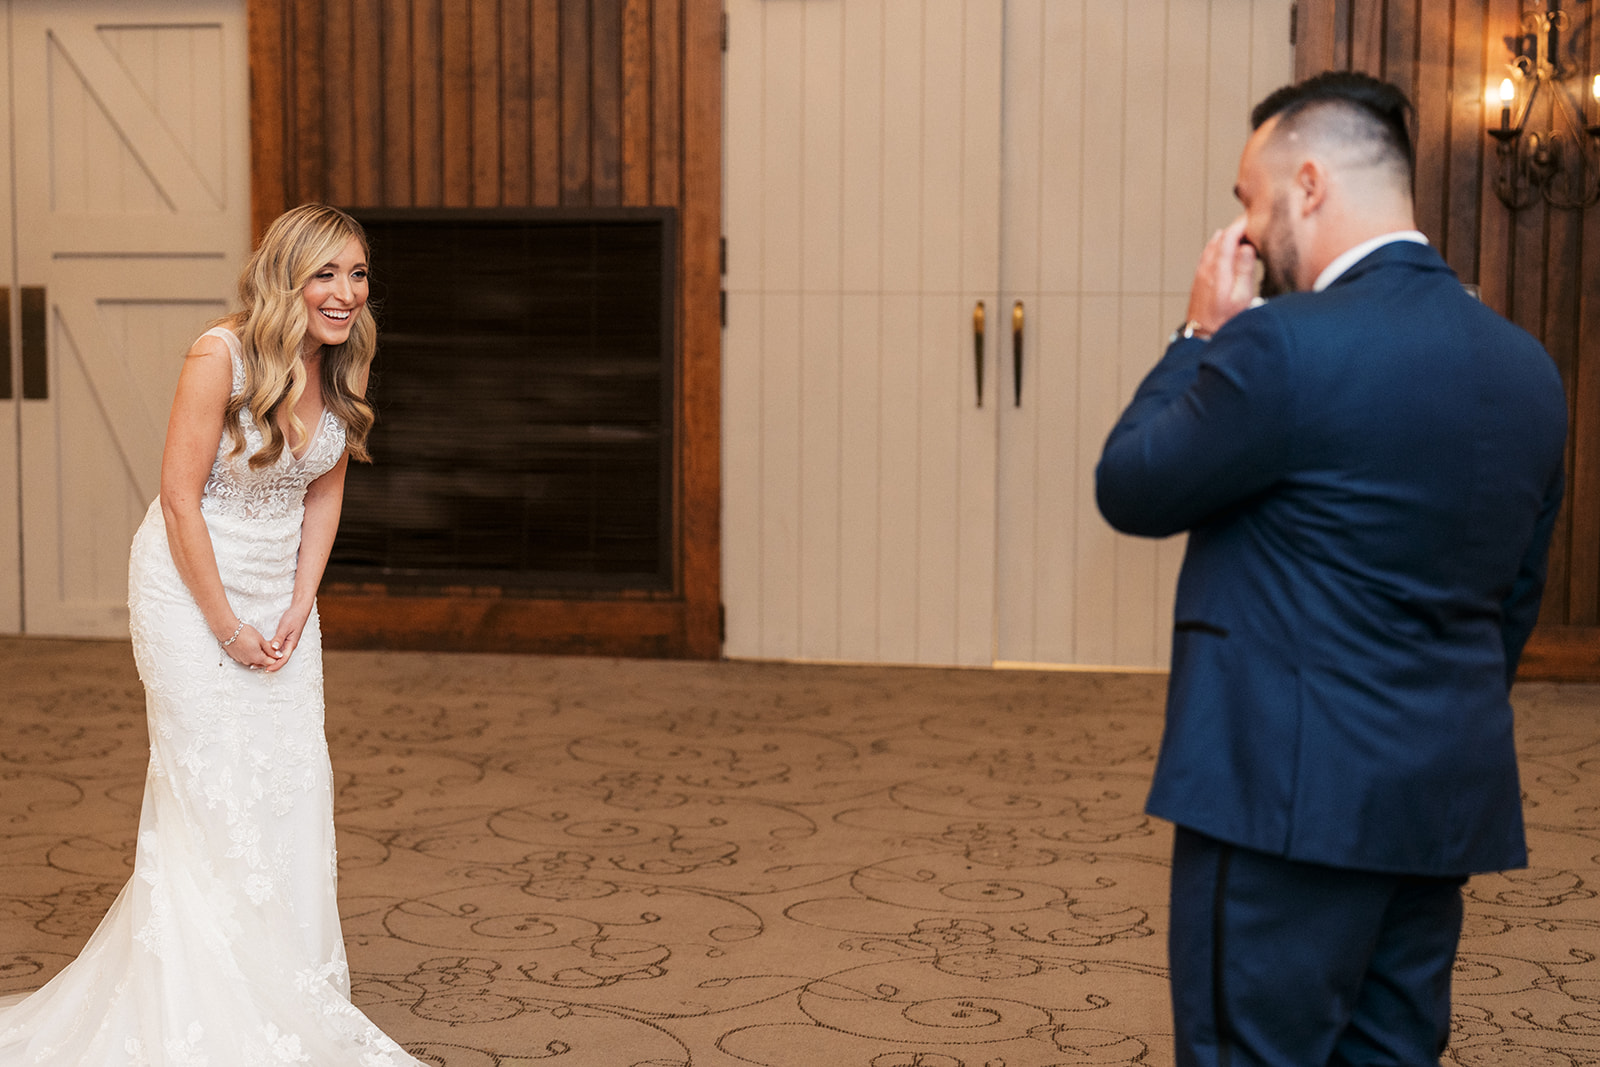 A groom wipes his eyes as he sees his bride for the first time on their wedding day